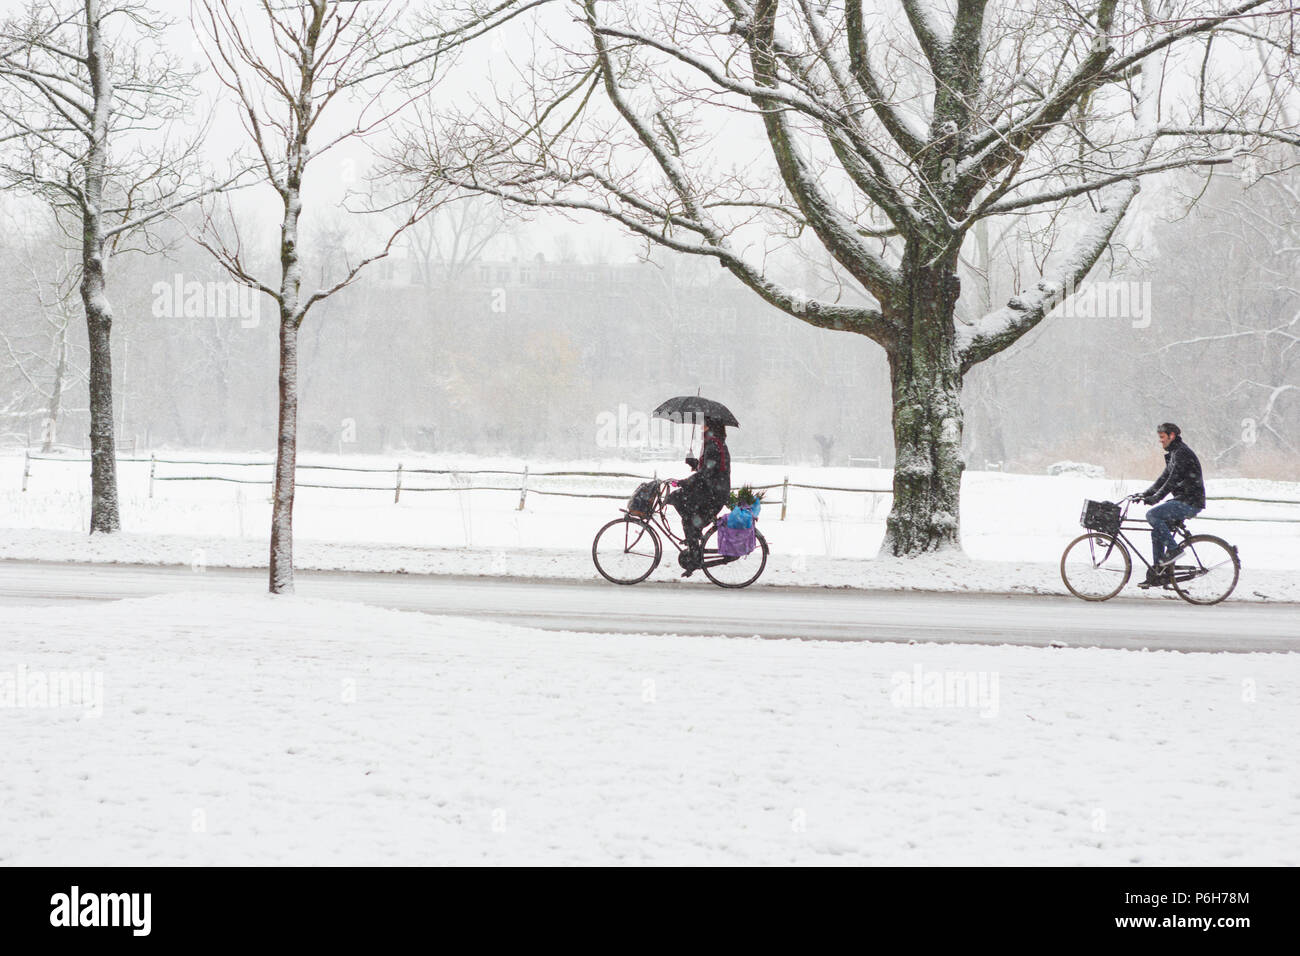 A woman with a umbrella and a man biking in the Amsterdam Vondelpark on a snowy winter day in december in the Netherlands. Stock Photo